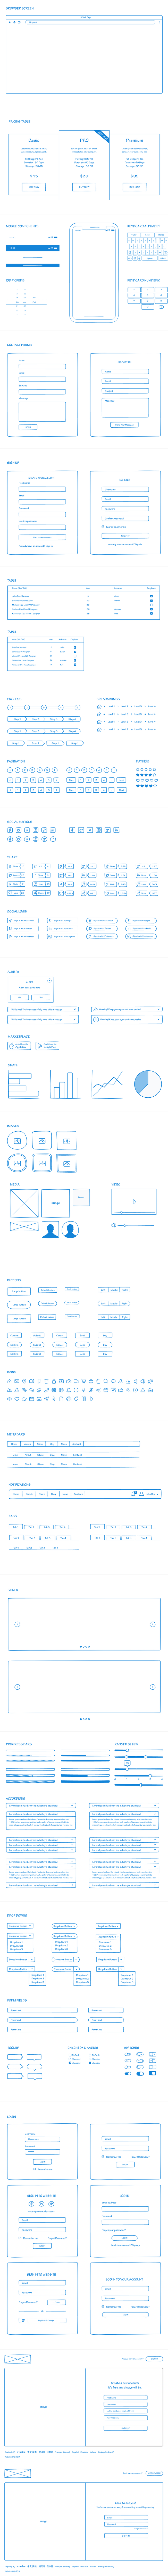 Hand Draw Wireframe UI Kit for Adobe XD - The Hand-drawn Wireframe UI Kit helps design teams quickly visualize experience design concepts in Adobe XD. This UI Kit mimics hand-drawn wireframe sketches on pen and paper for both mobile and web and is meant to help designers digitize low-fidelity wireframes in Adobe XD.